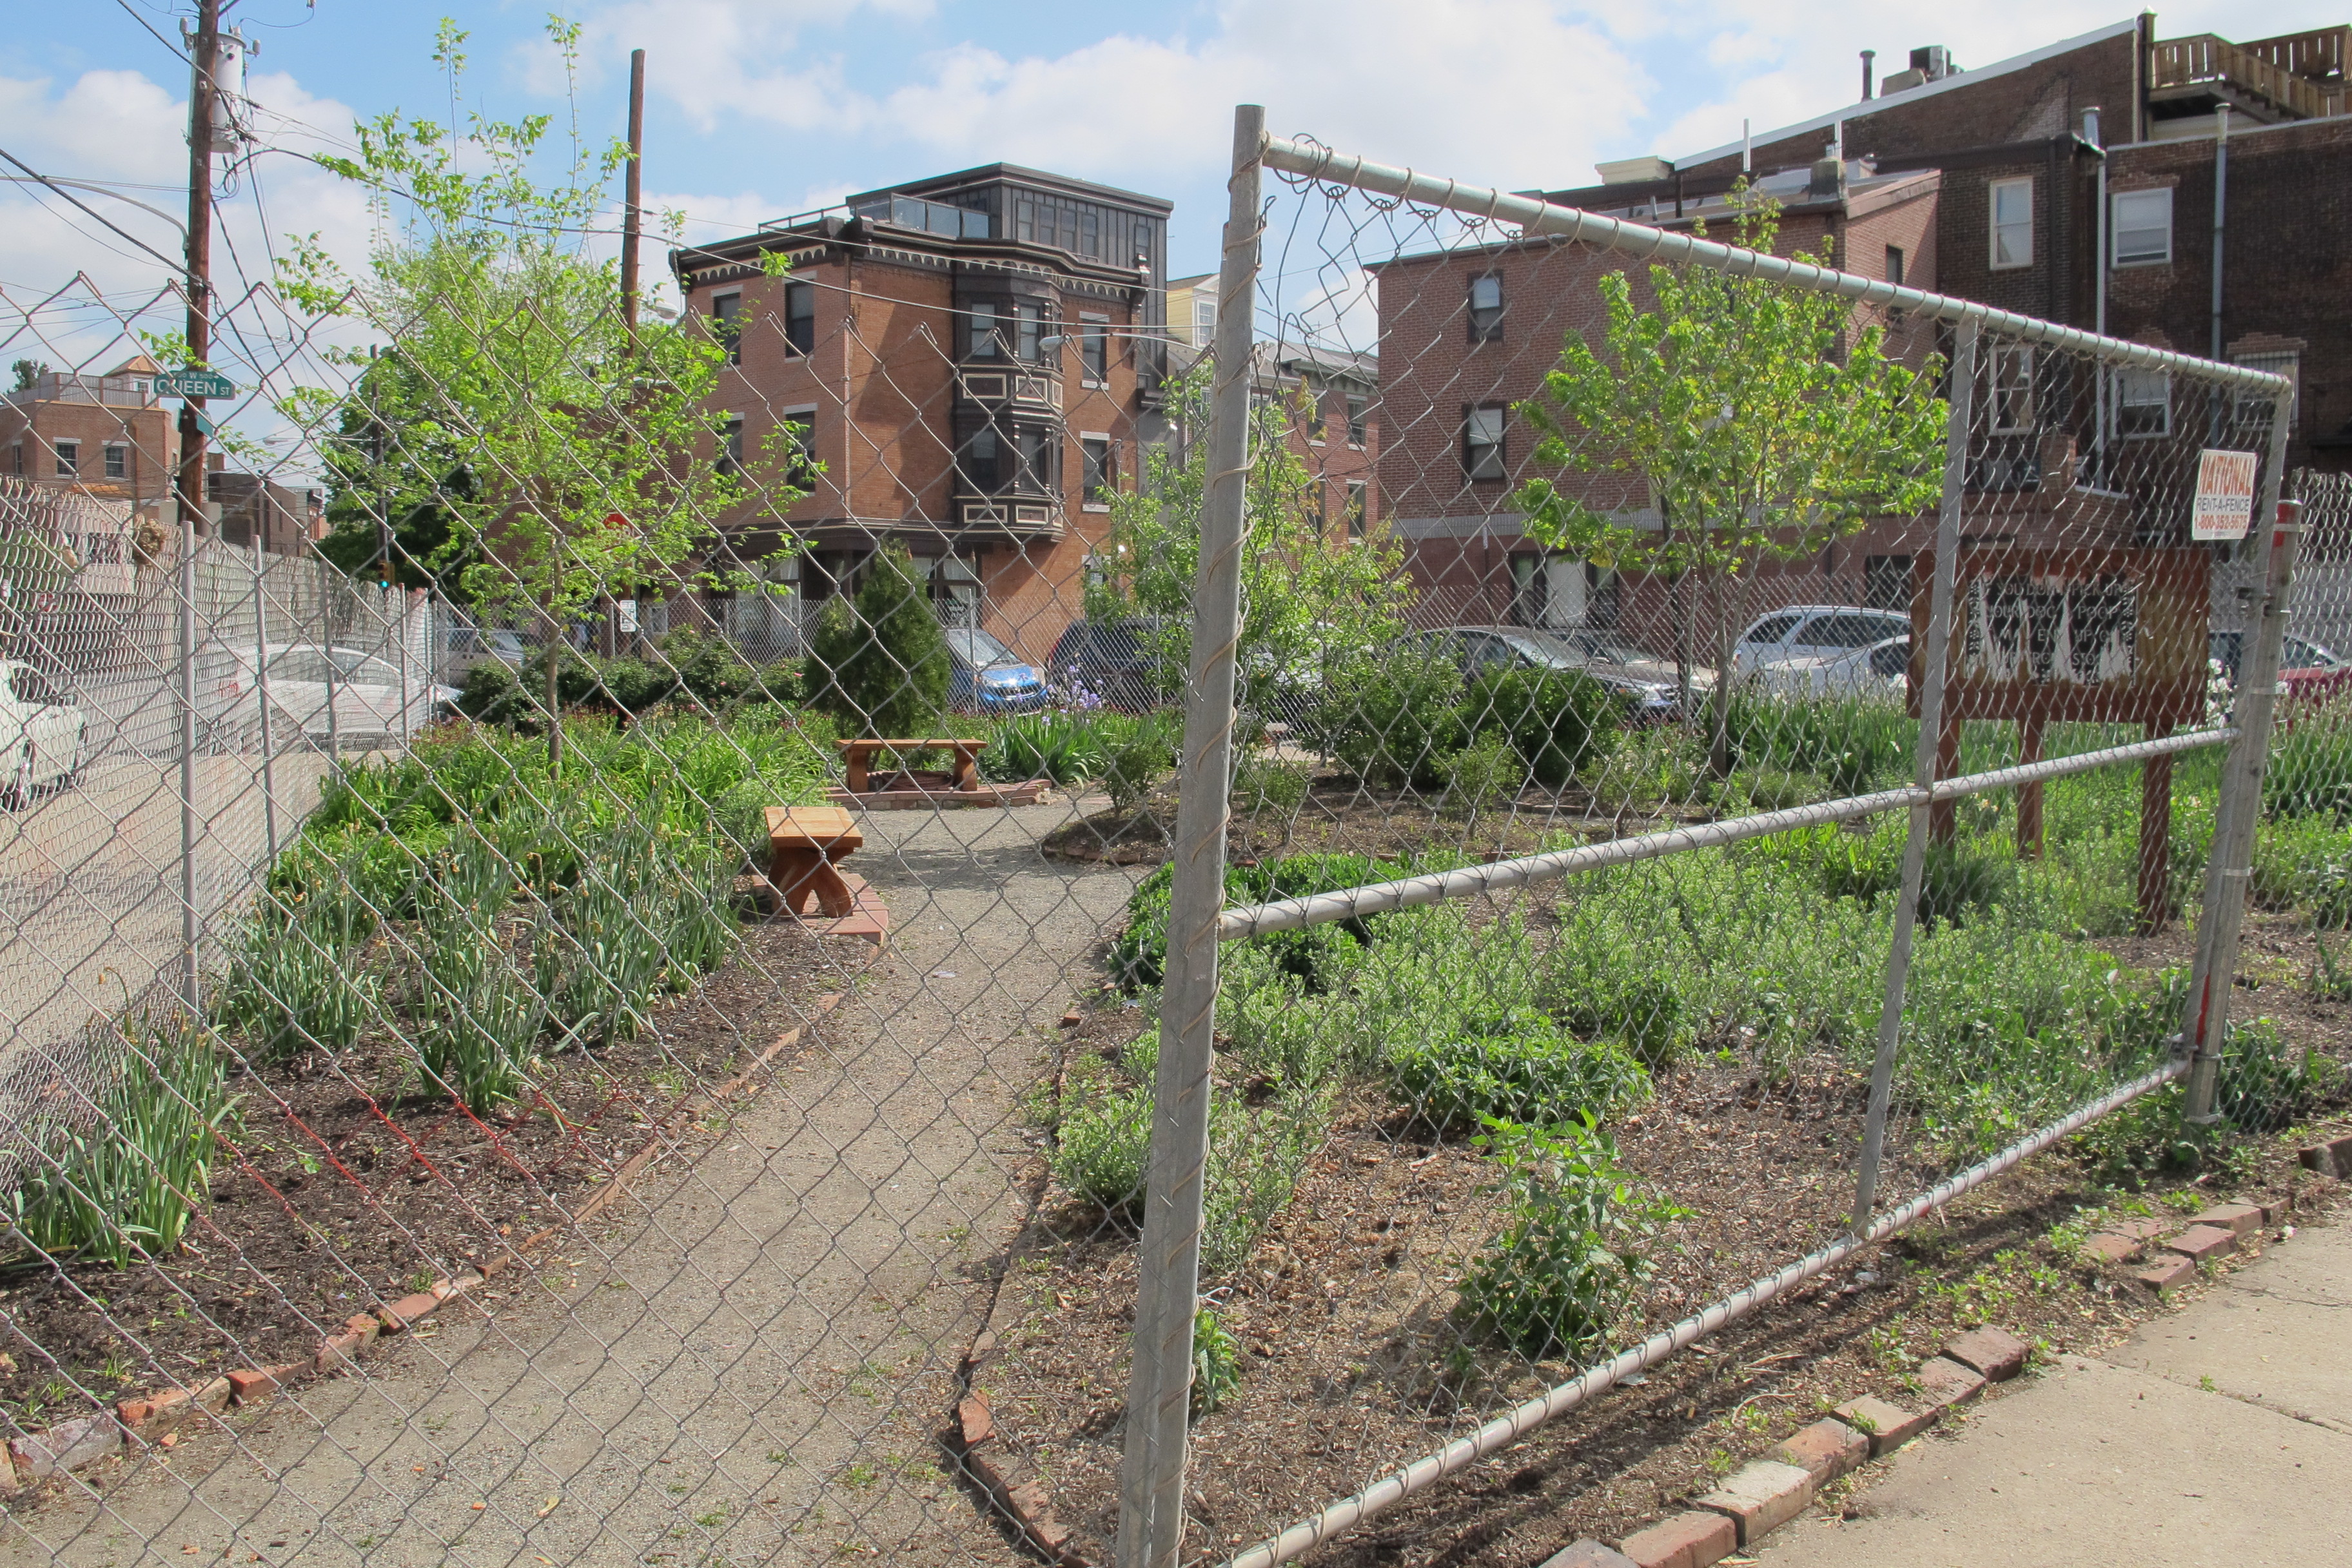 Triangle Park at 601 Christian Street was fenced by its owner, Stuart Schlaffman, last week.